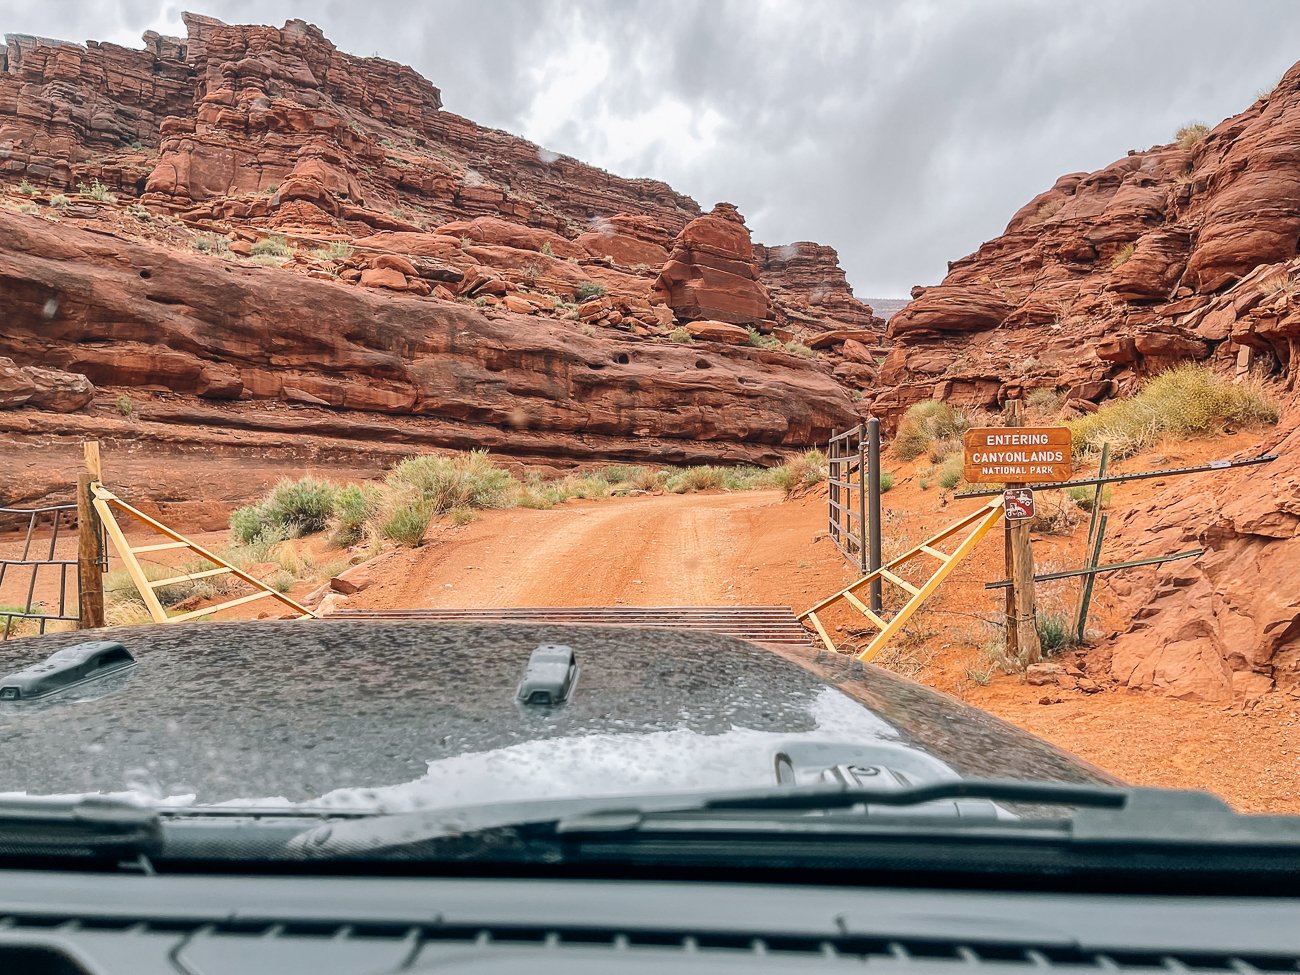 driving onto Shafer Trail